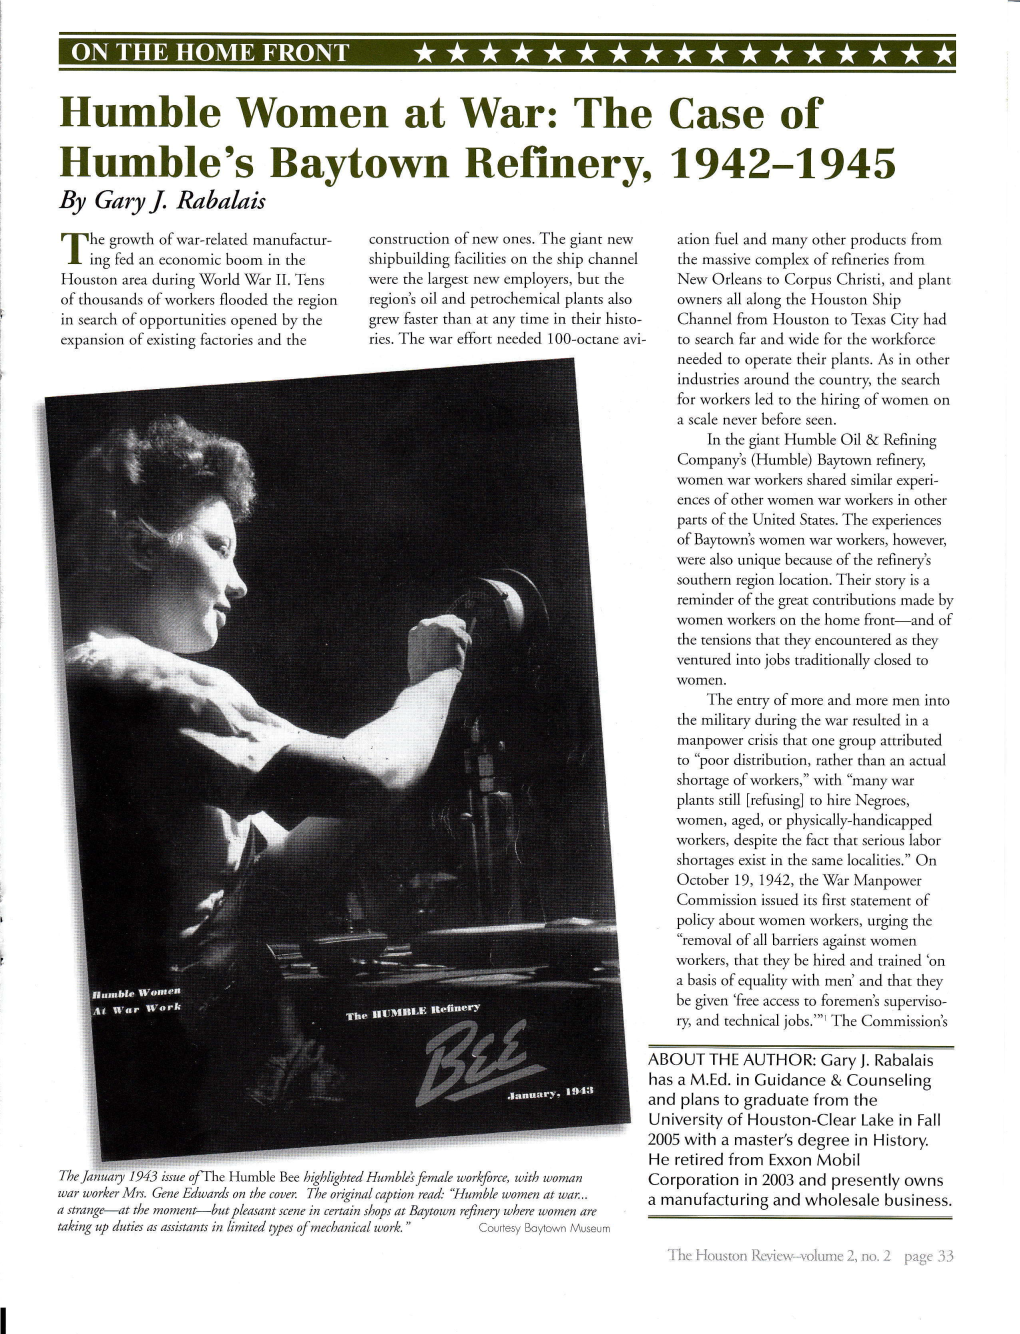 Humhle Women at War: the Case of Humhle's Baytown Refinery, 1942-1945 by Gary J